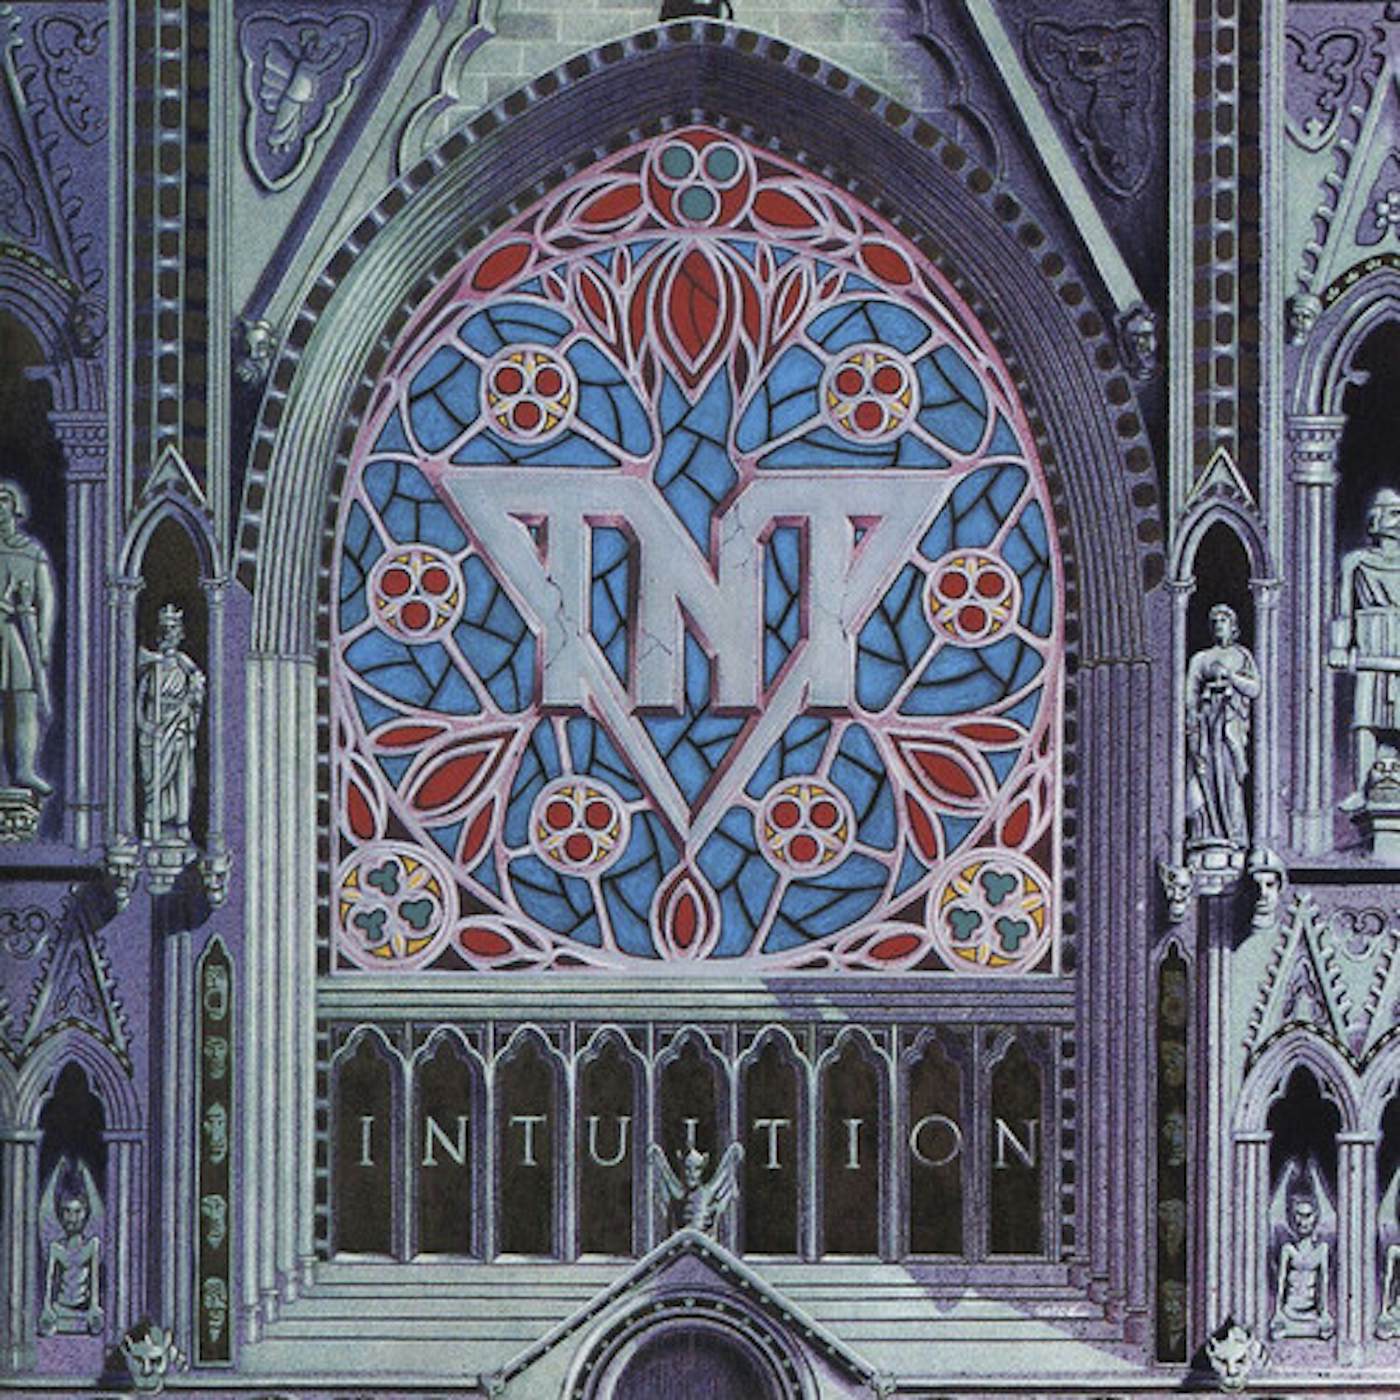 TNT INTUITION (IMPORT) CD